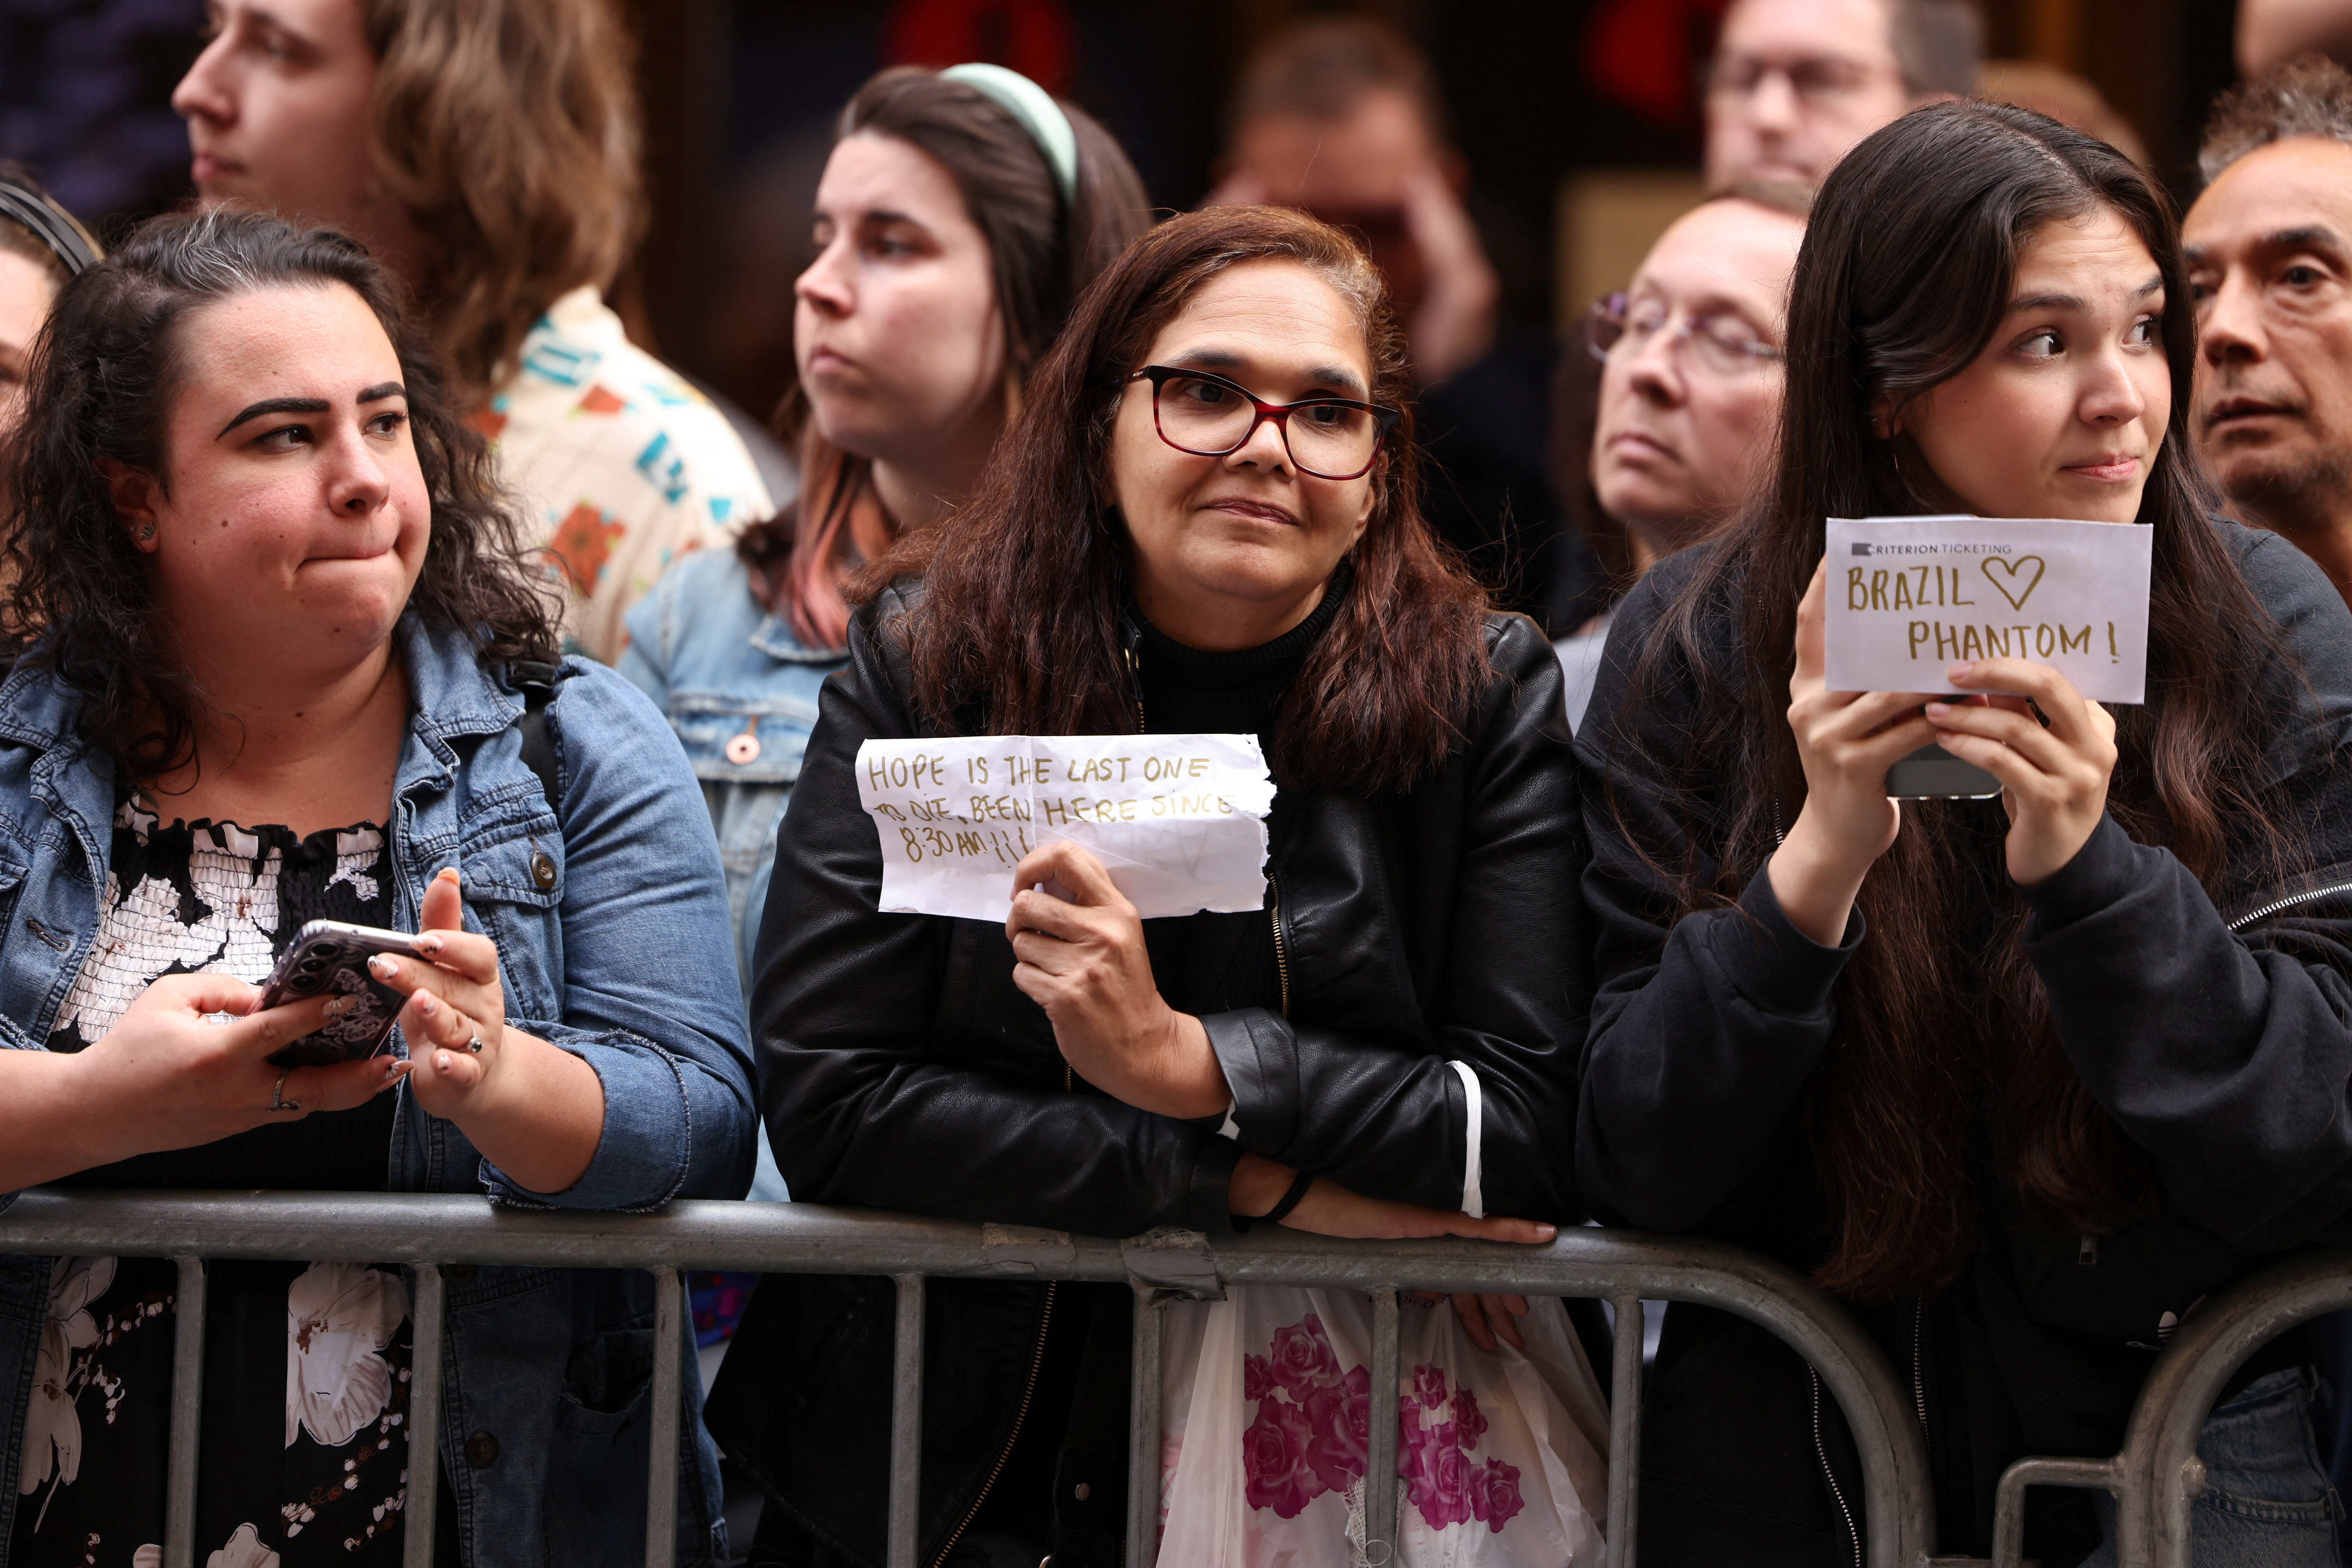 Some fans hoped to get last minute tickets in front of the theater.  (PHOTO: REUTERS/Caitlin Ochs)